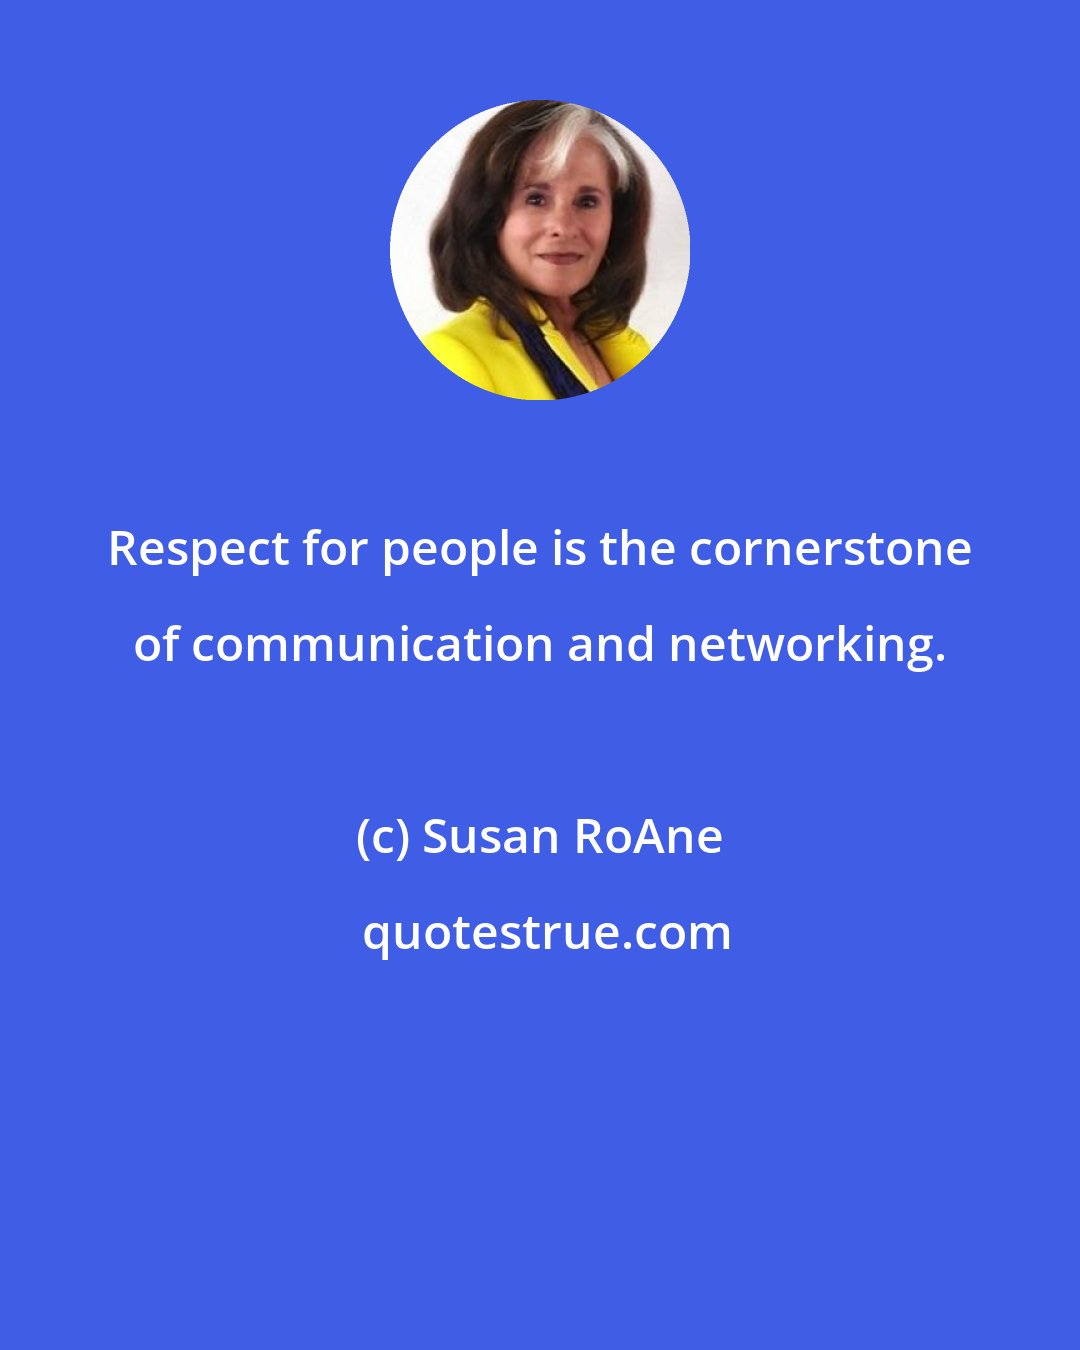 Susan RoAne: Respect for people is the cornerstone of communication and networking.